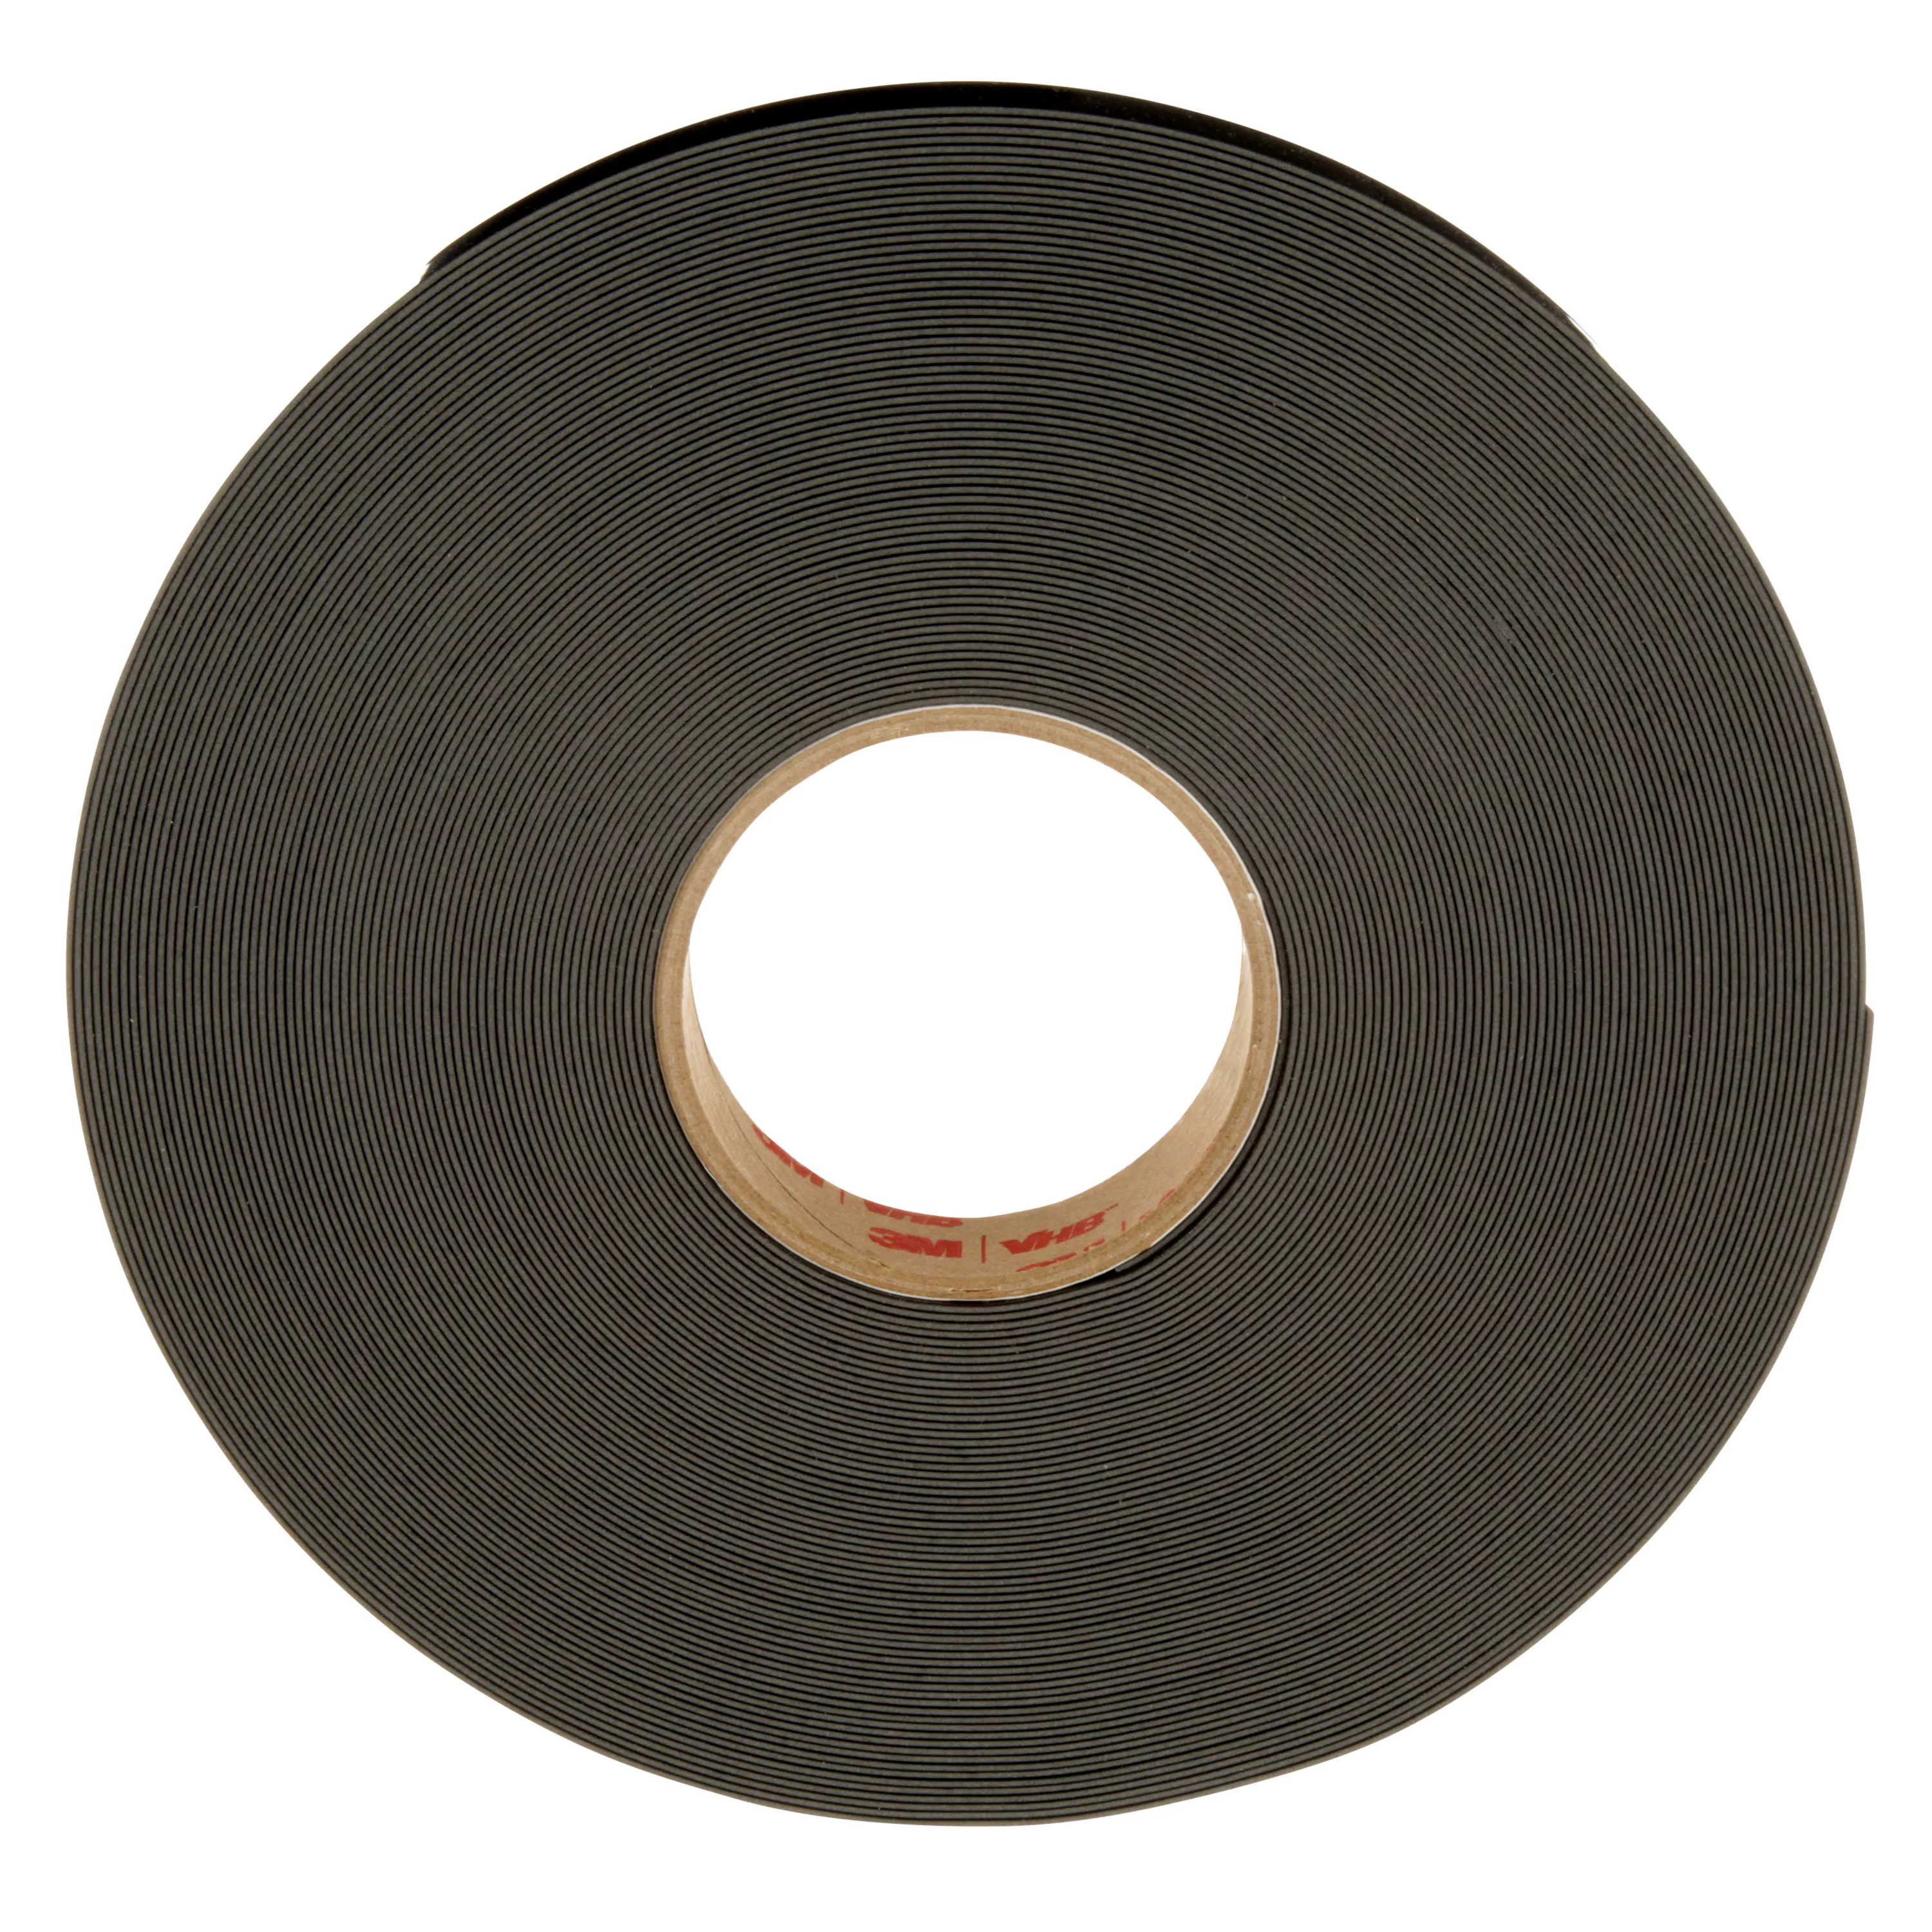 Product Number 4949 | 3M™ VHB™ Tape 4949